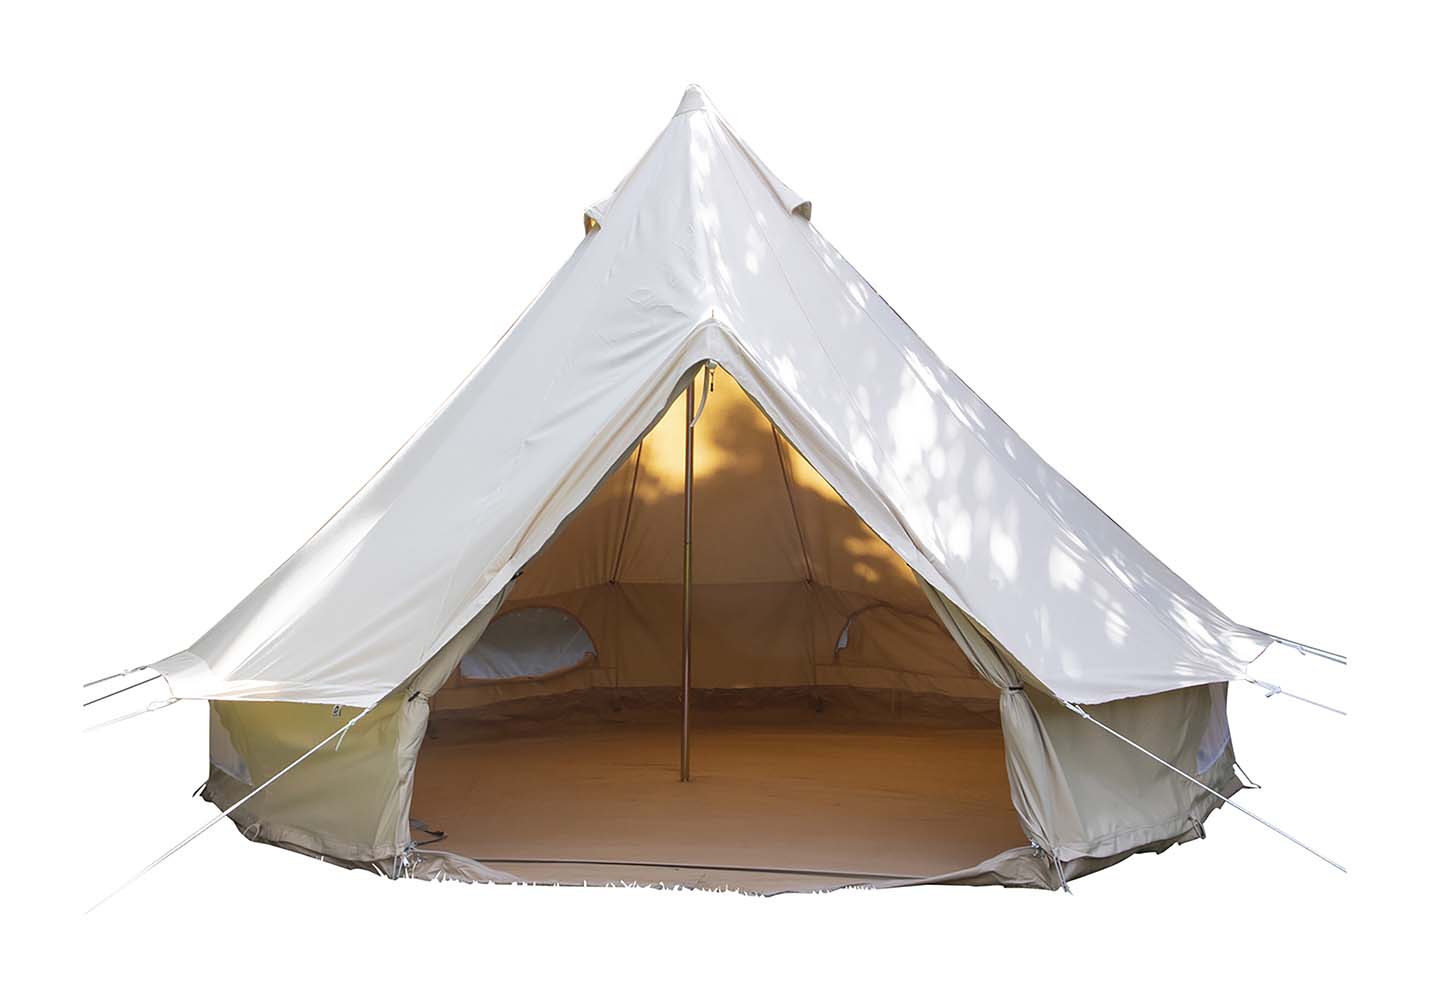 4472500 A classic Bell tent. An extremely popular Sahara tent with a large floor area and high ease of use. The diameter of this tent is 4 meters and the ridge height is 2.5 meters. This makes the tent suitable for up to 6 people. Made from high quality canvas, 100% cotton (285g/m²), and a 540 gram PVC groundsheet. Both are water resistant, rot and mold resistant. The groundsheet is fully removable by means of a zipper. In addition the sides can be rolled up completely to a height of 60 cm for extra ventilation. Moreover, there are several windows in the sides. The entrance has a double door, 1 cotton door and 1 cotton mesh door (against insects). Comes with strong pegs, guy ropes and a handy storage bag. In short, a decent and stylish tent for years of enjoyment!